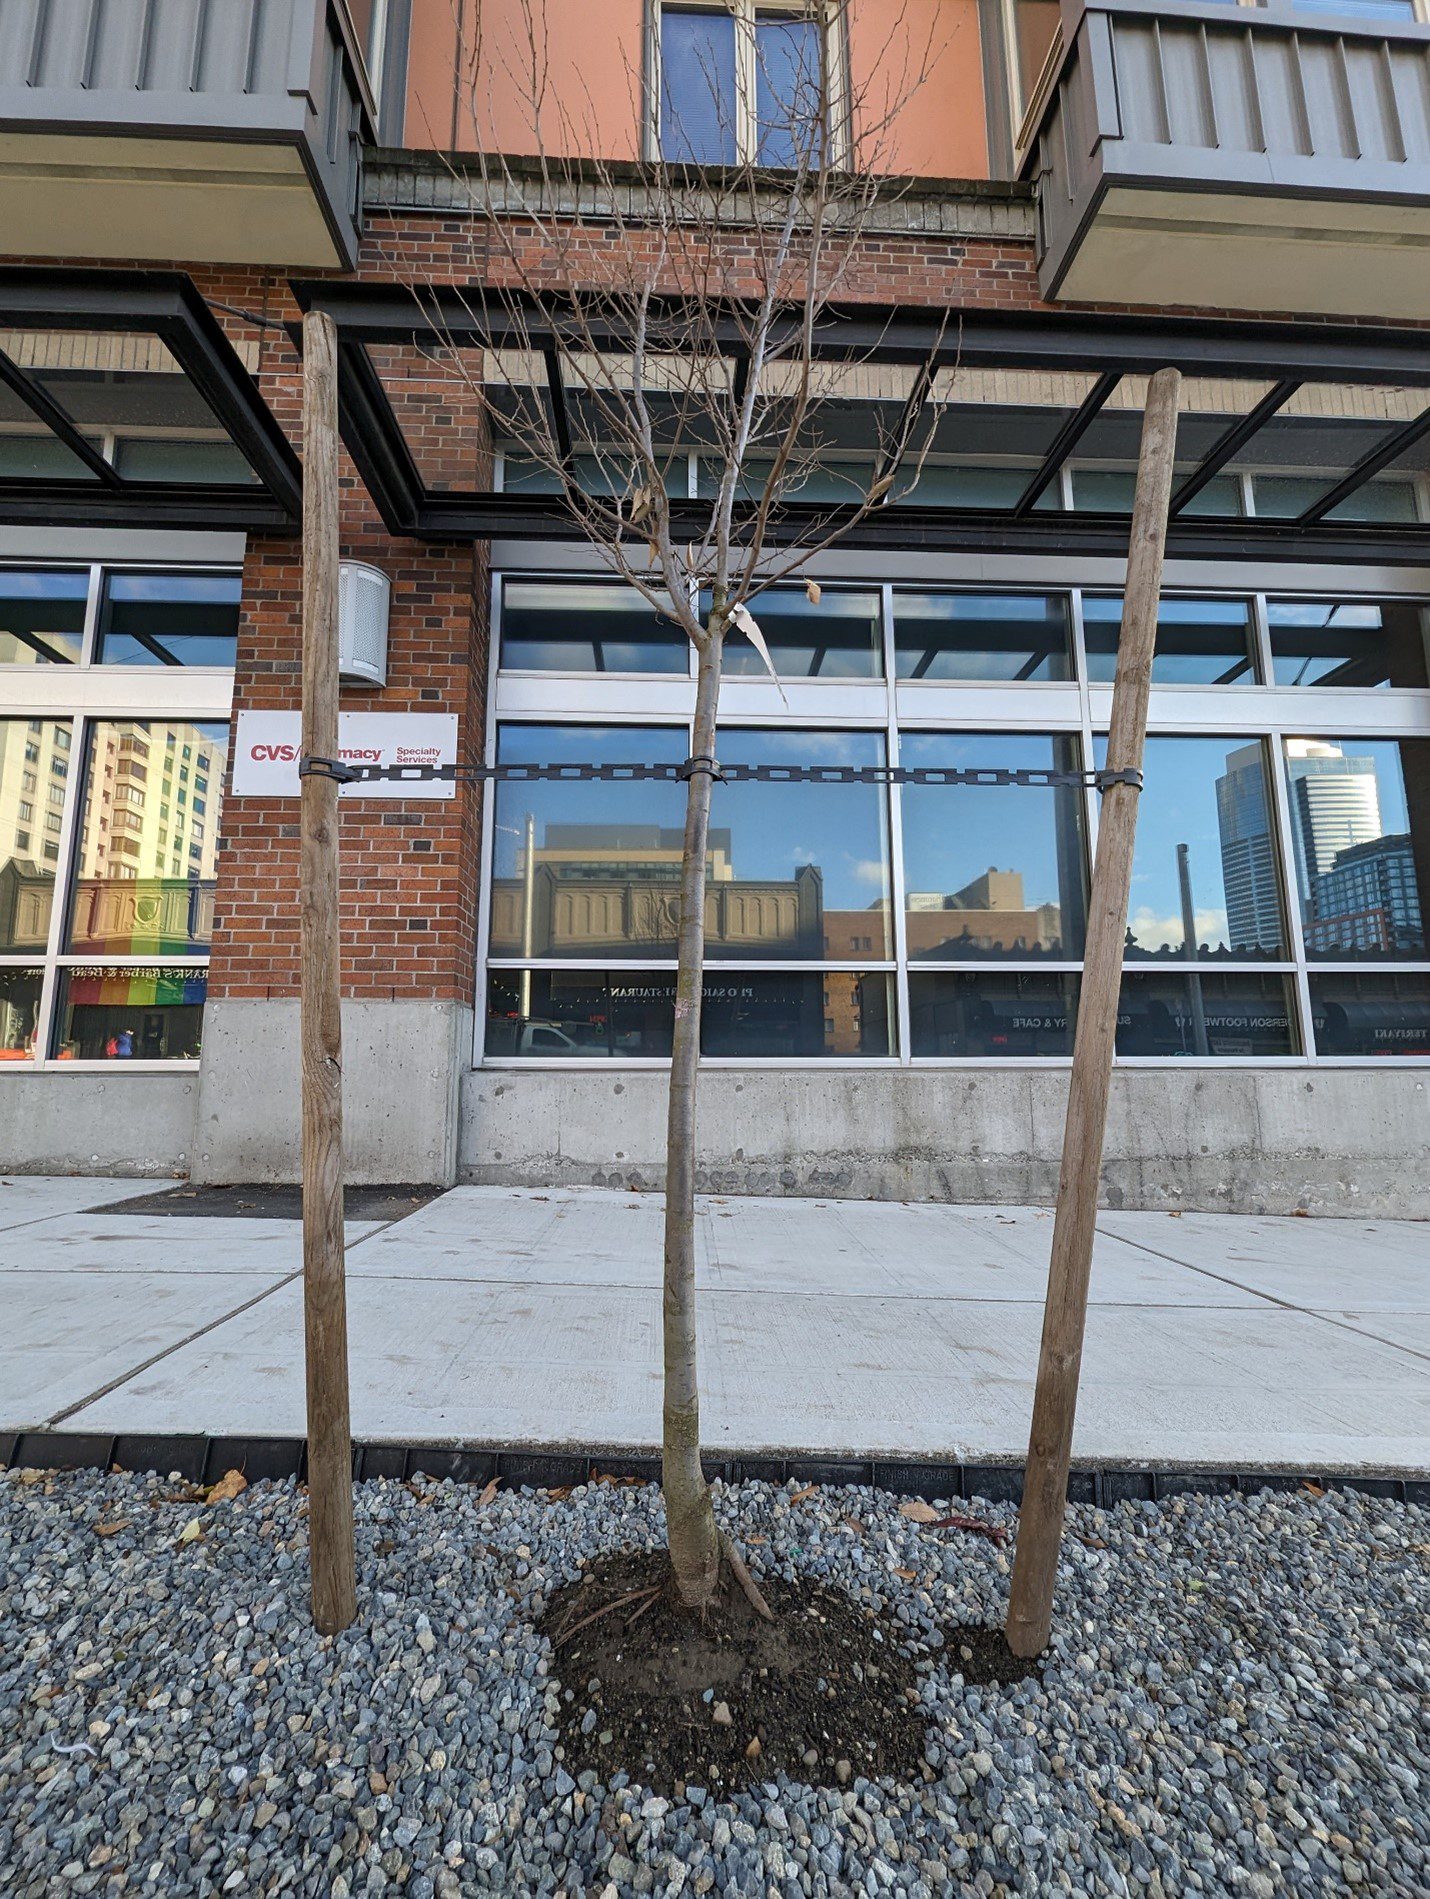 A newly planted tree stands in front of a sidewalk and a large building.